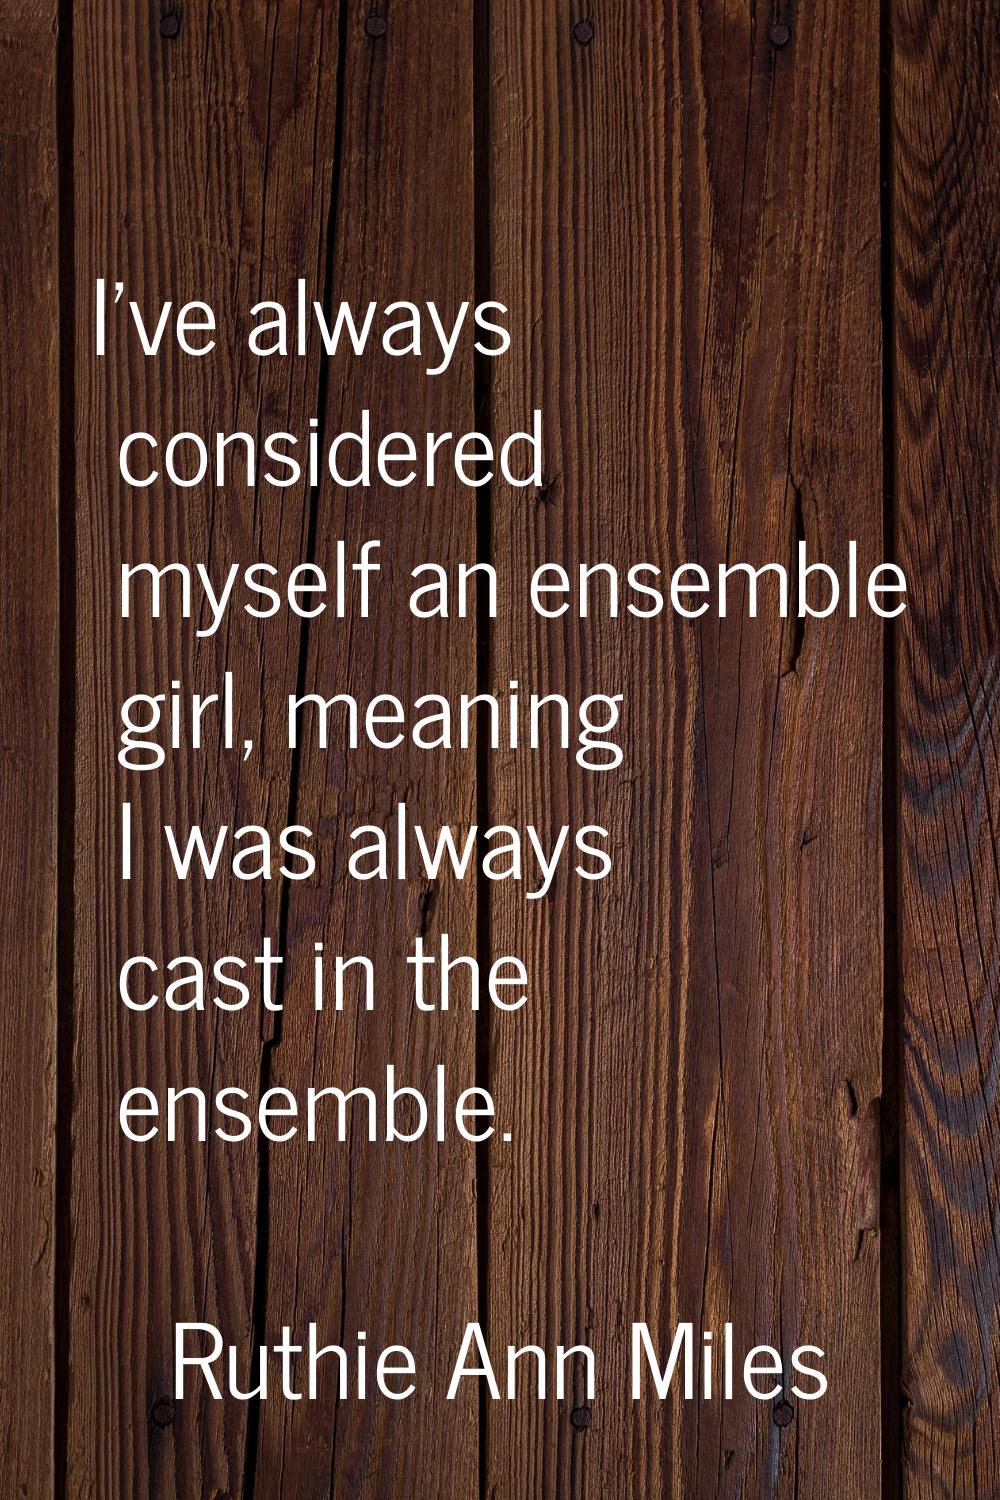 I've always considered myself an ensemble girl, meaning I was always cast in the ensemble.